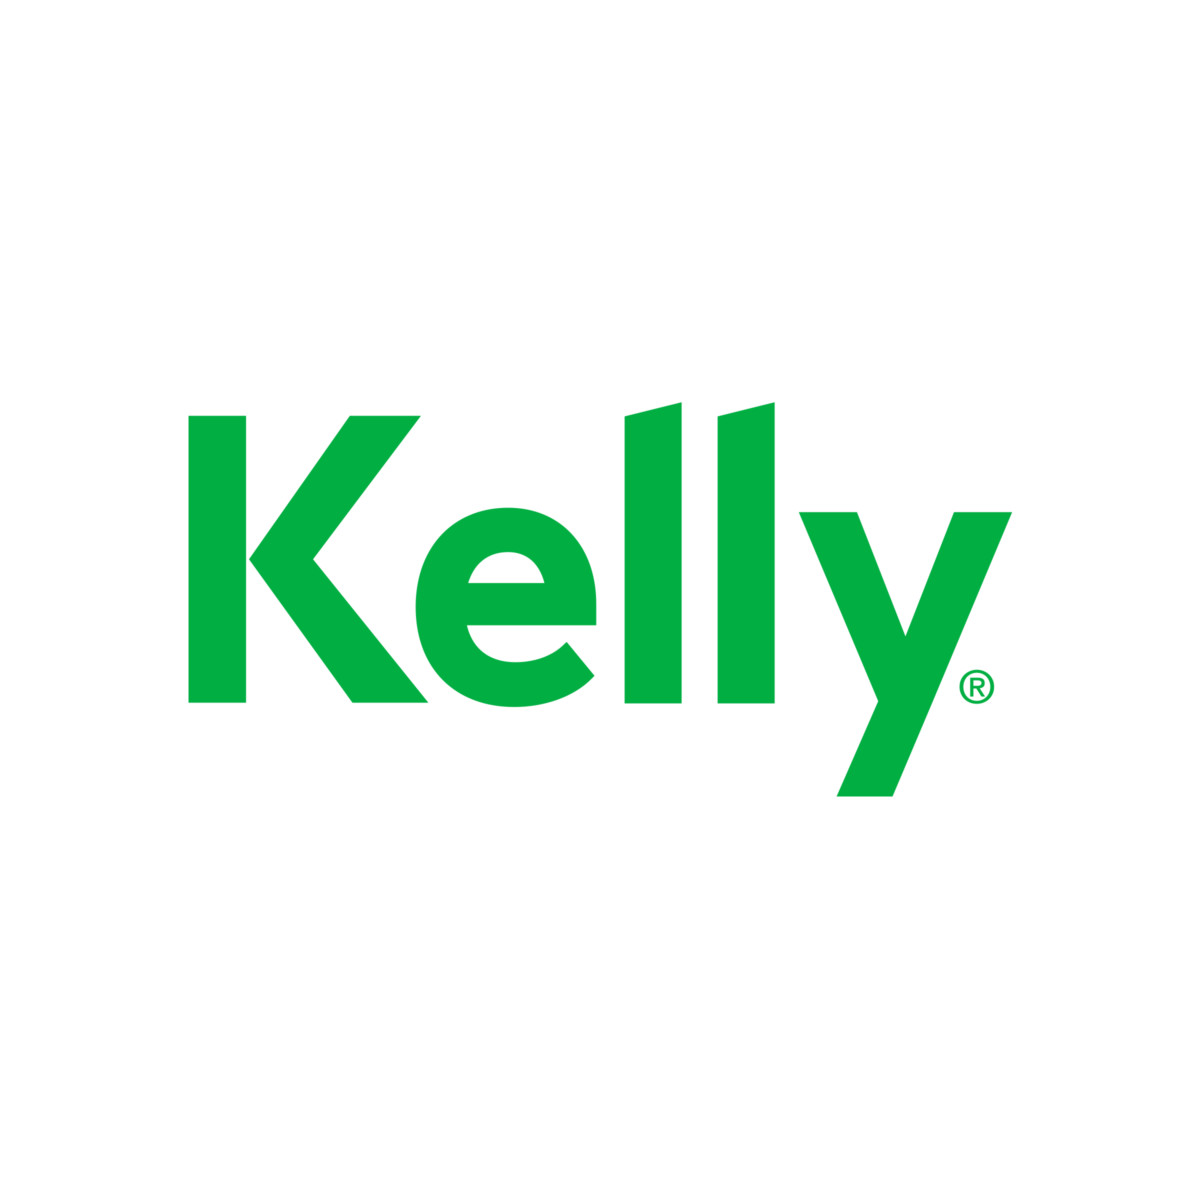 Kelly_OneColor